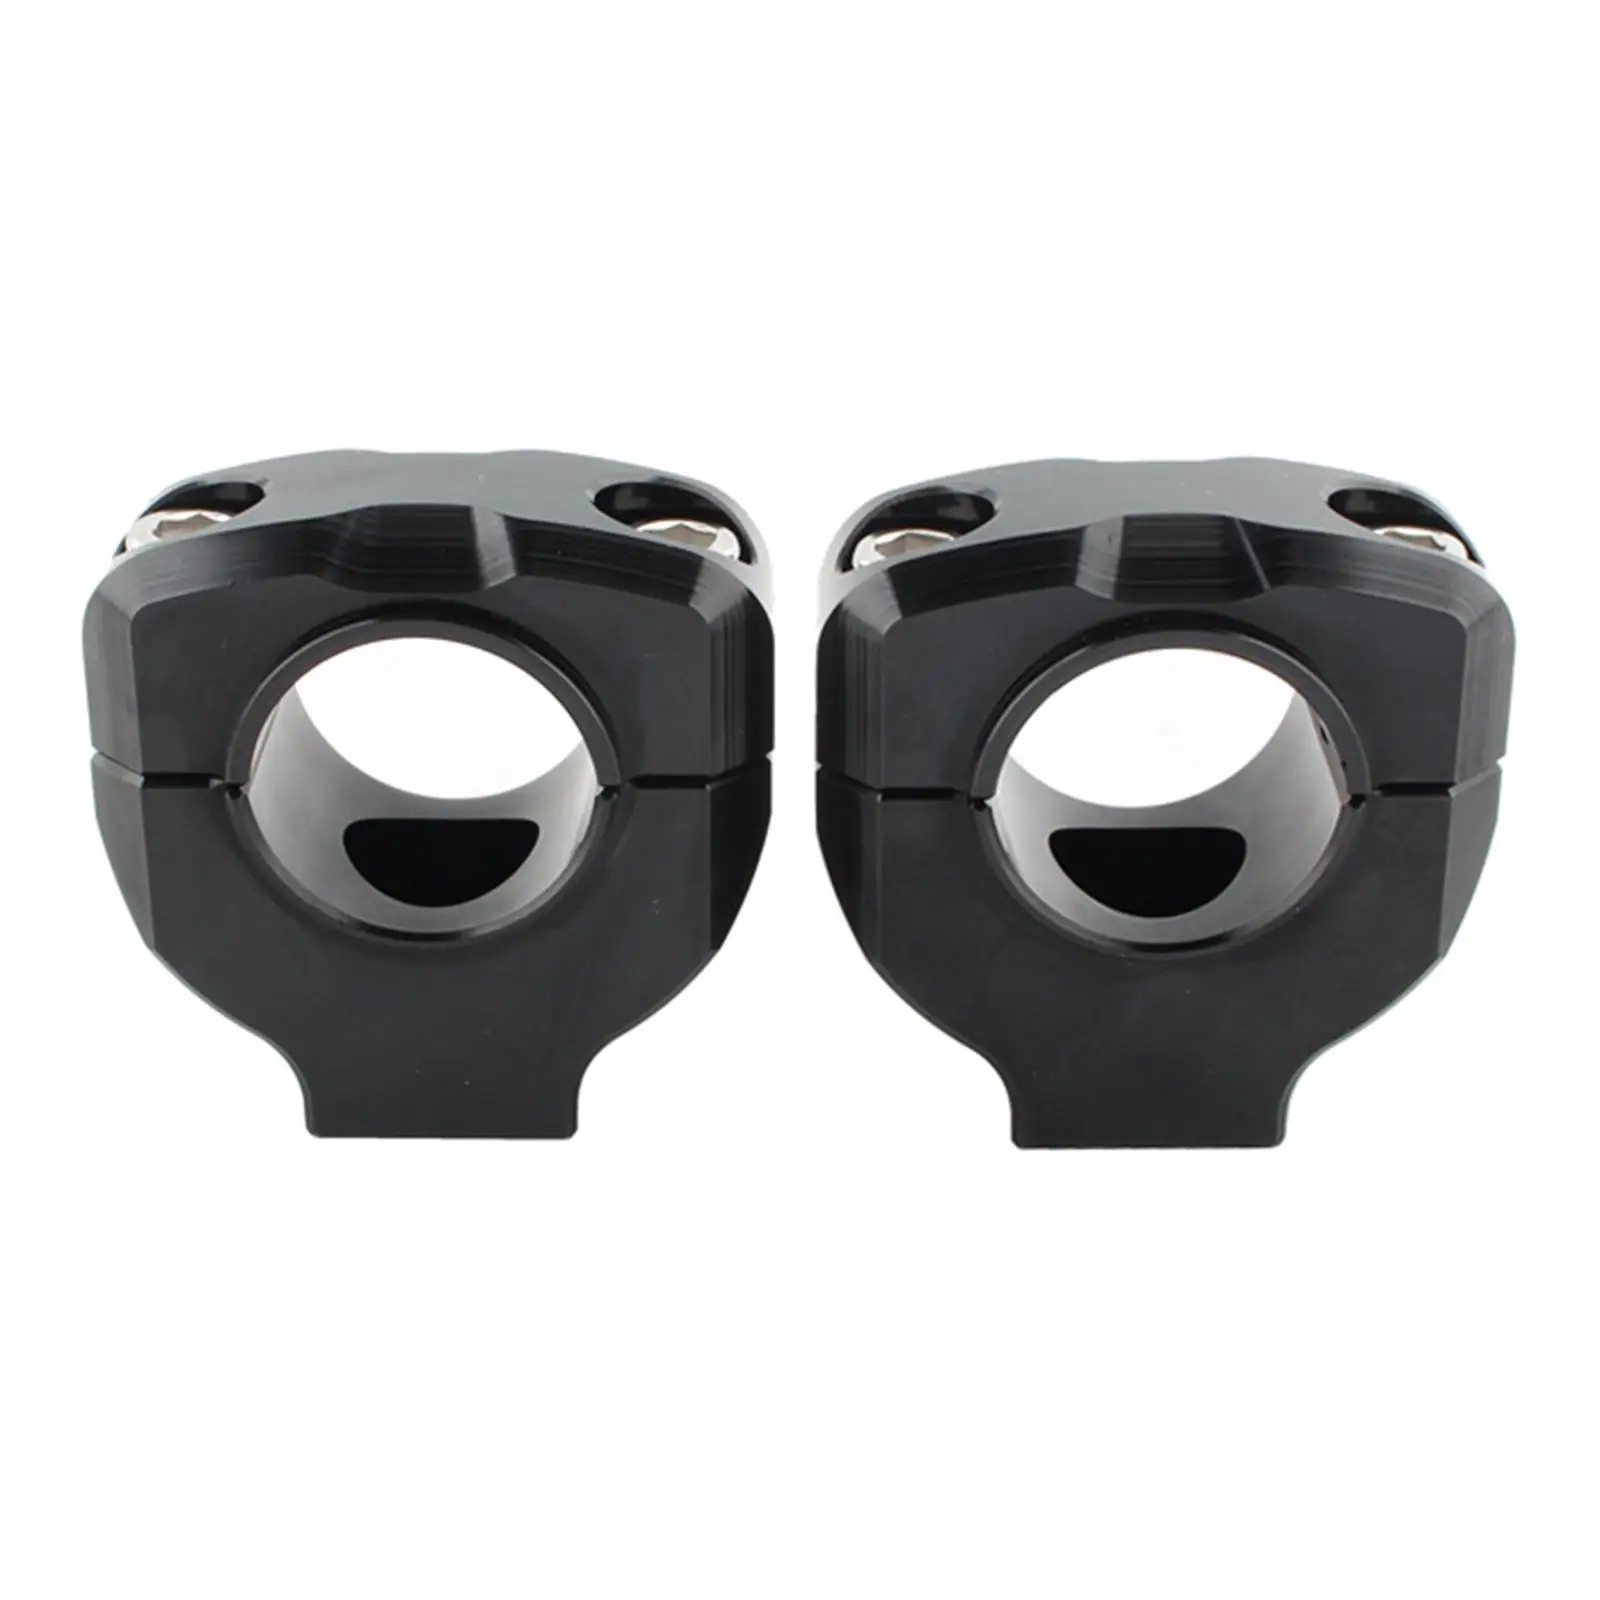 1 pair of universal motorcycle 28mm 1/8 inch handlebar riser clamp   Lifter - £16.79 GBP